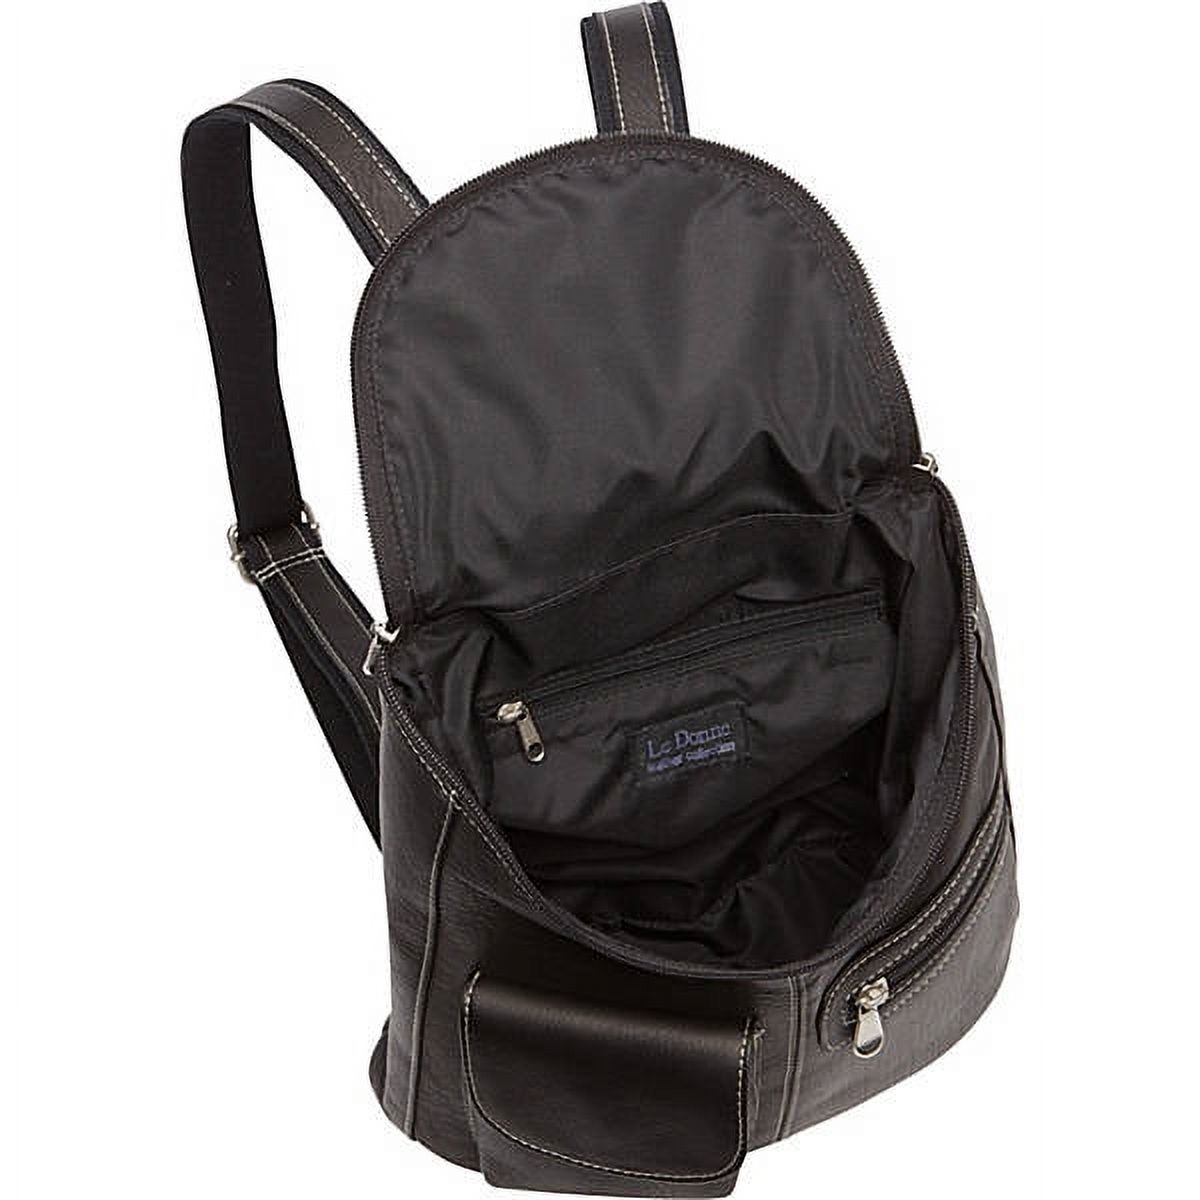 Le Donne Leather Lafayette Classic Backpack LD-9108 - image 3 of 5